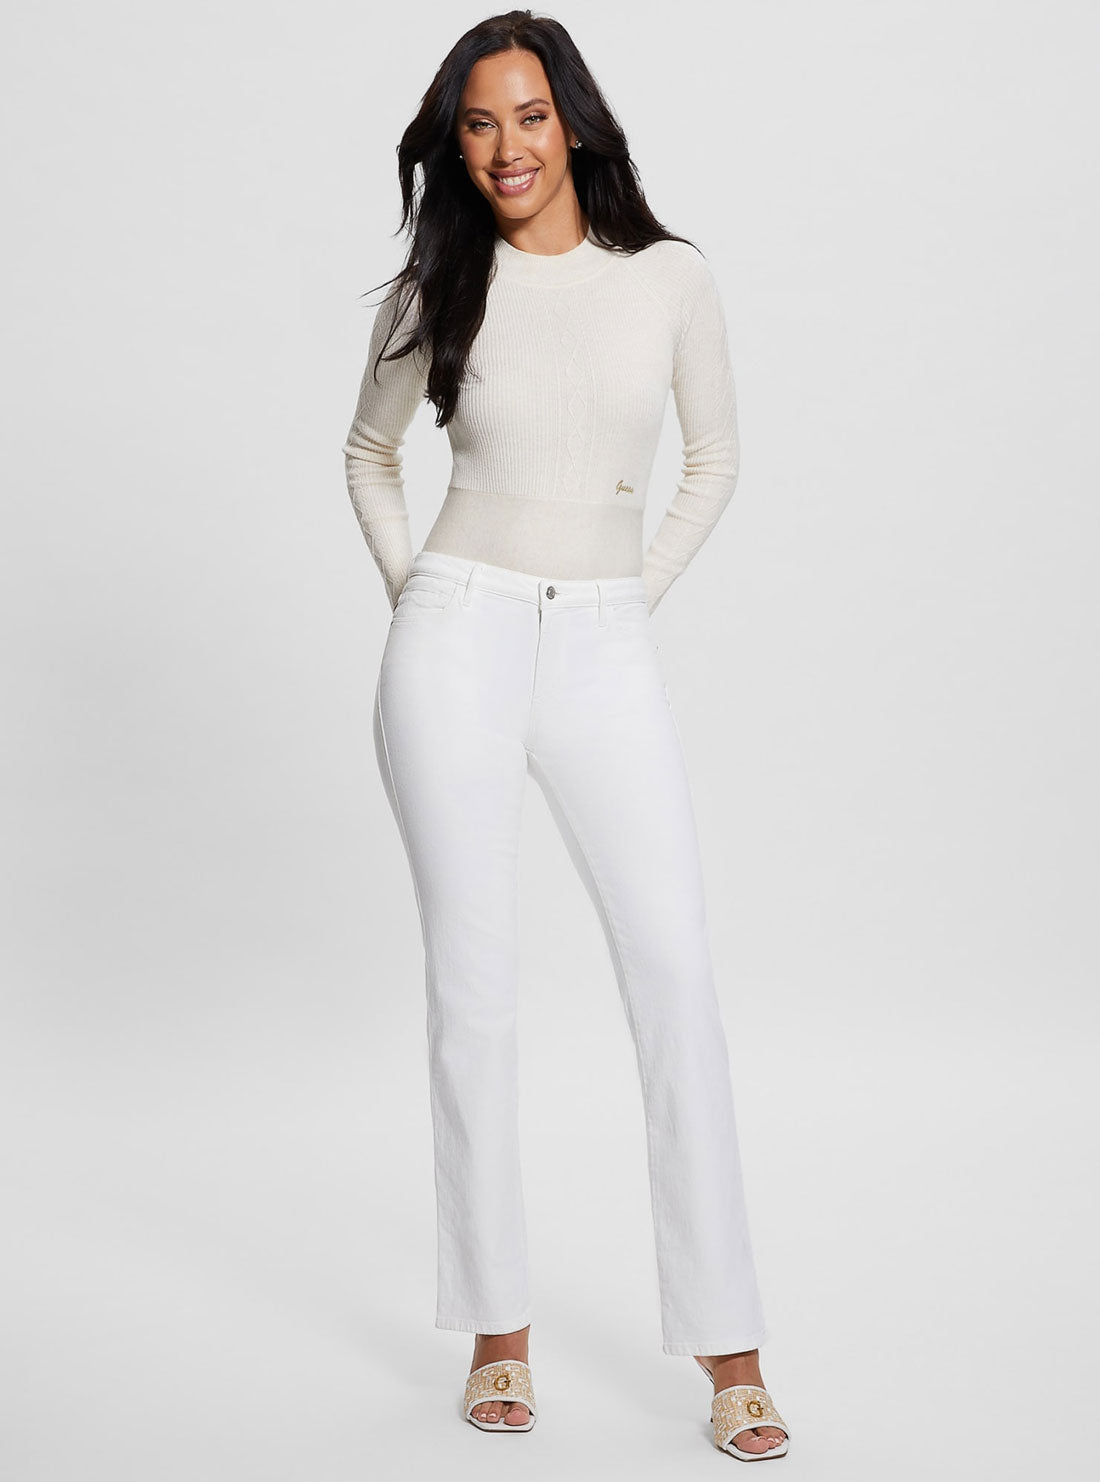 White Melodie Long Sleeve Knit Top | GUESS Women's Apparel | full view